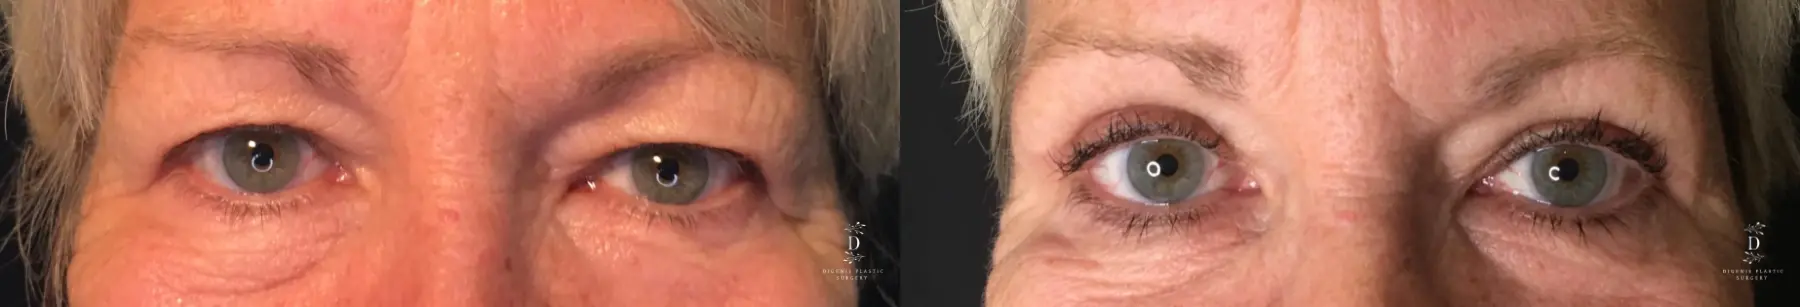 Eyelid Surgery: Patient 33 - Before and After 1